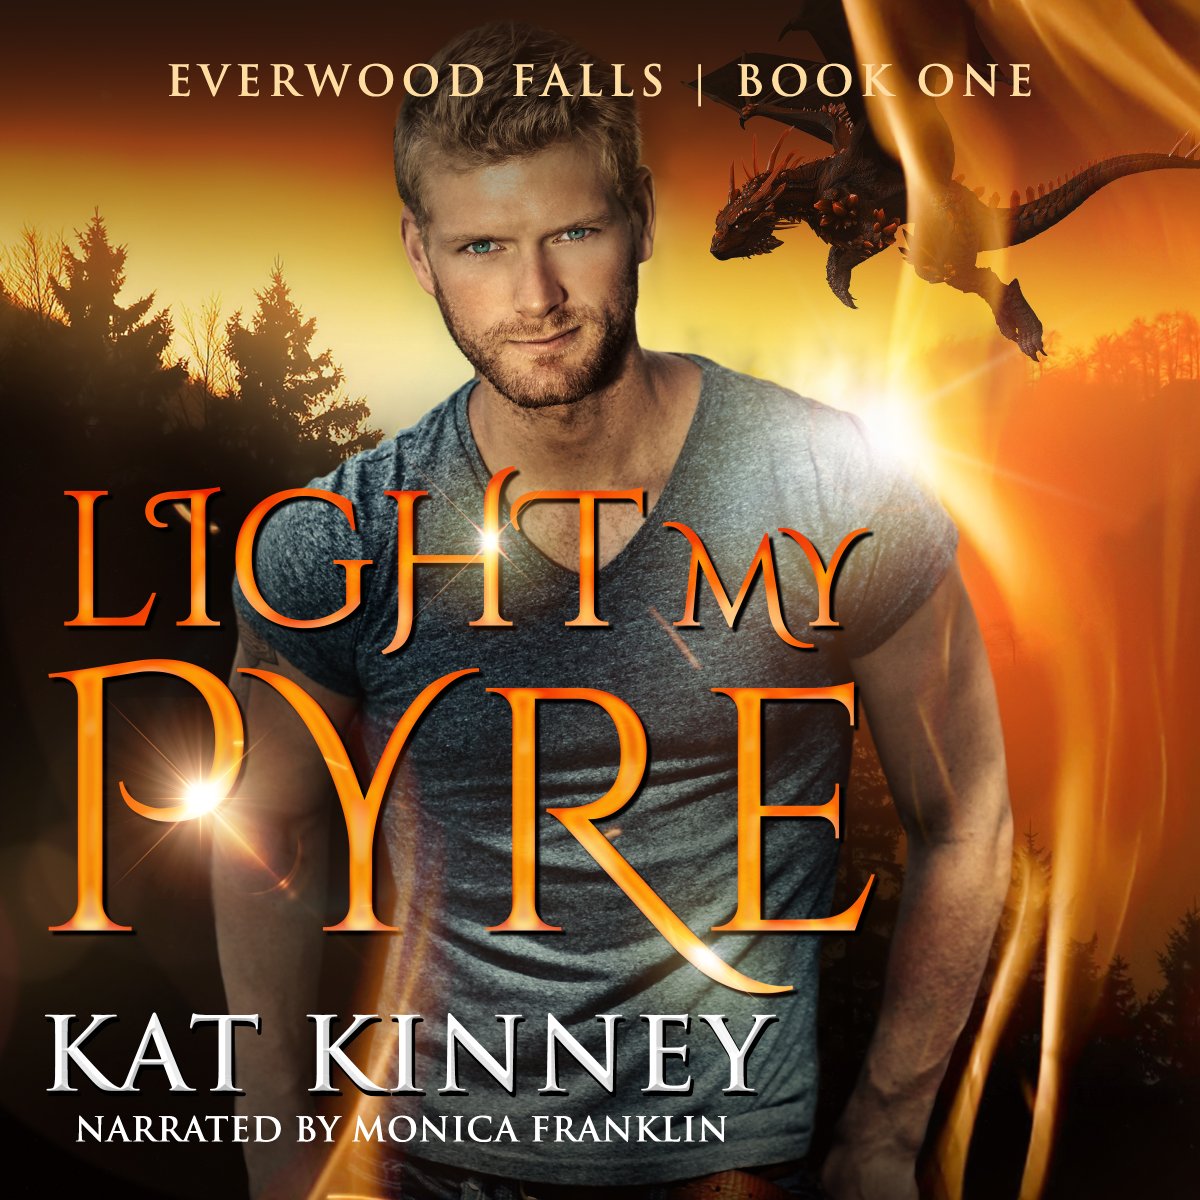 #FantasyIndiesMaytober day 17 Super excited about releasing my first audiobook! Light My Pyre is now available over on 🎧Audible.🎧 Monica Franklin did an amazing job narrating! #audible #cozyfantasy #cozymystery #paranormalromance